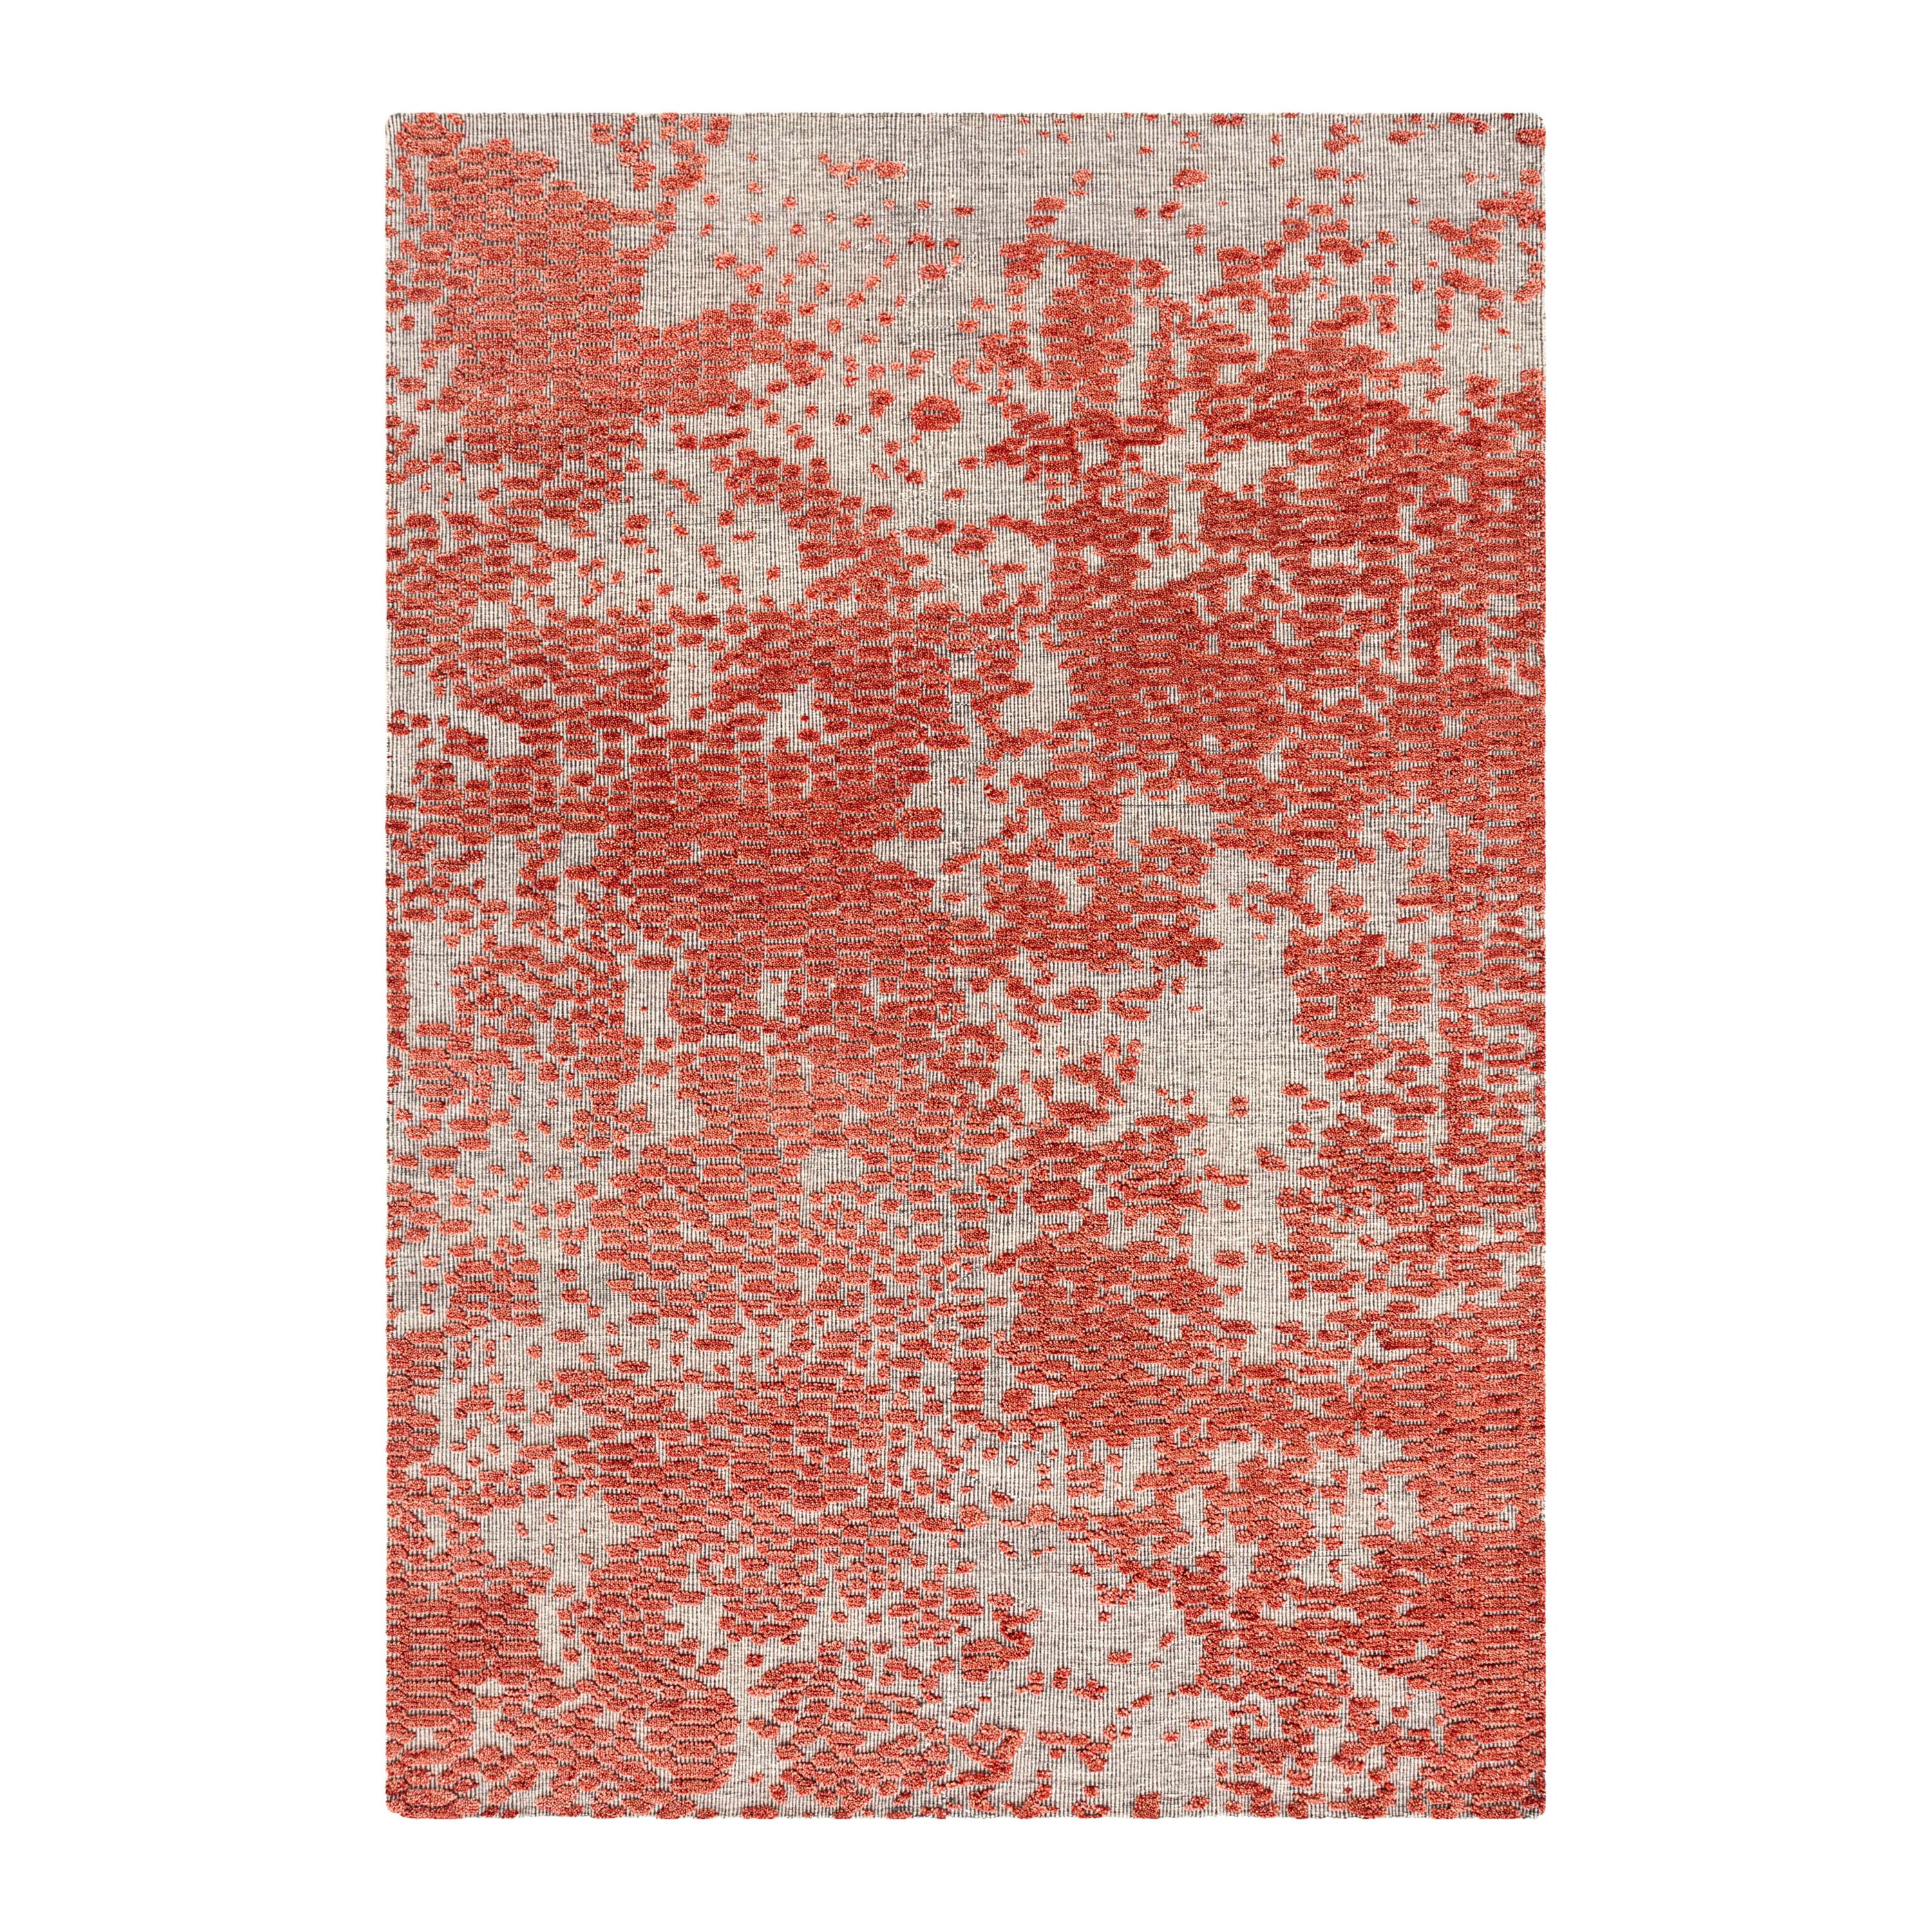 GAN Japan Rug in Hand Knotted Coral and White Wool